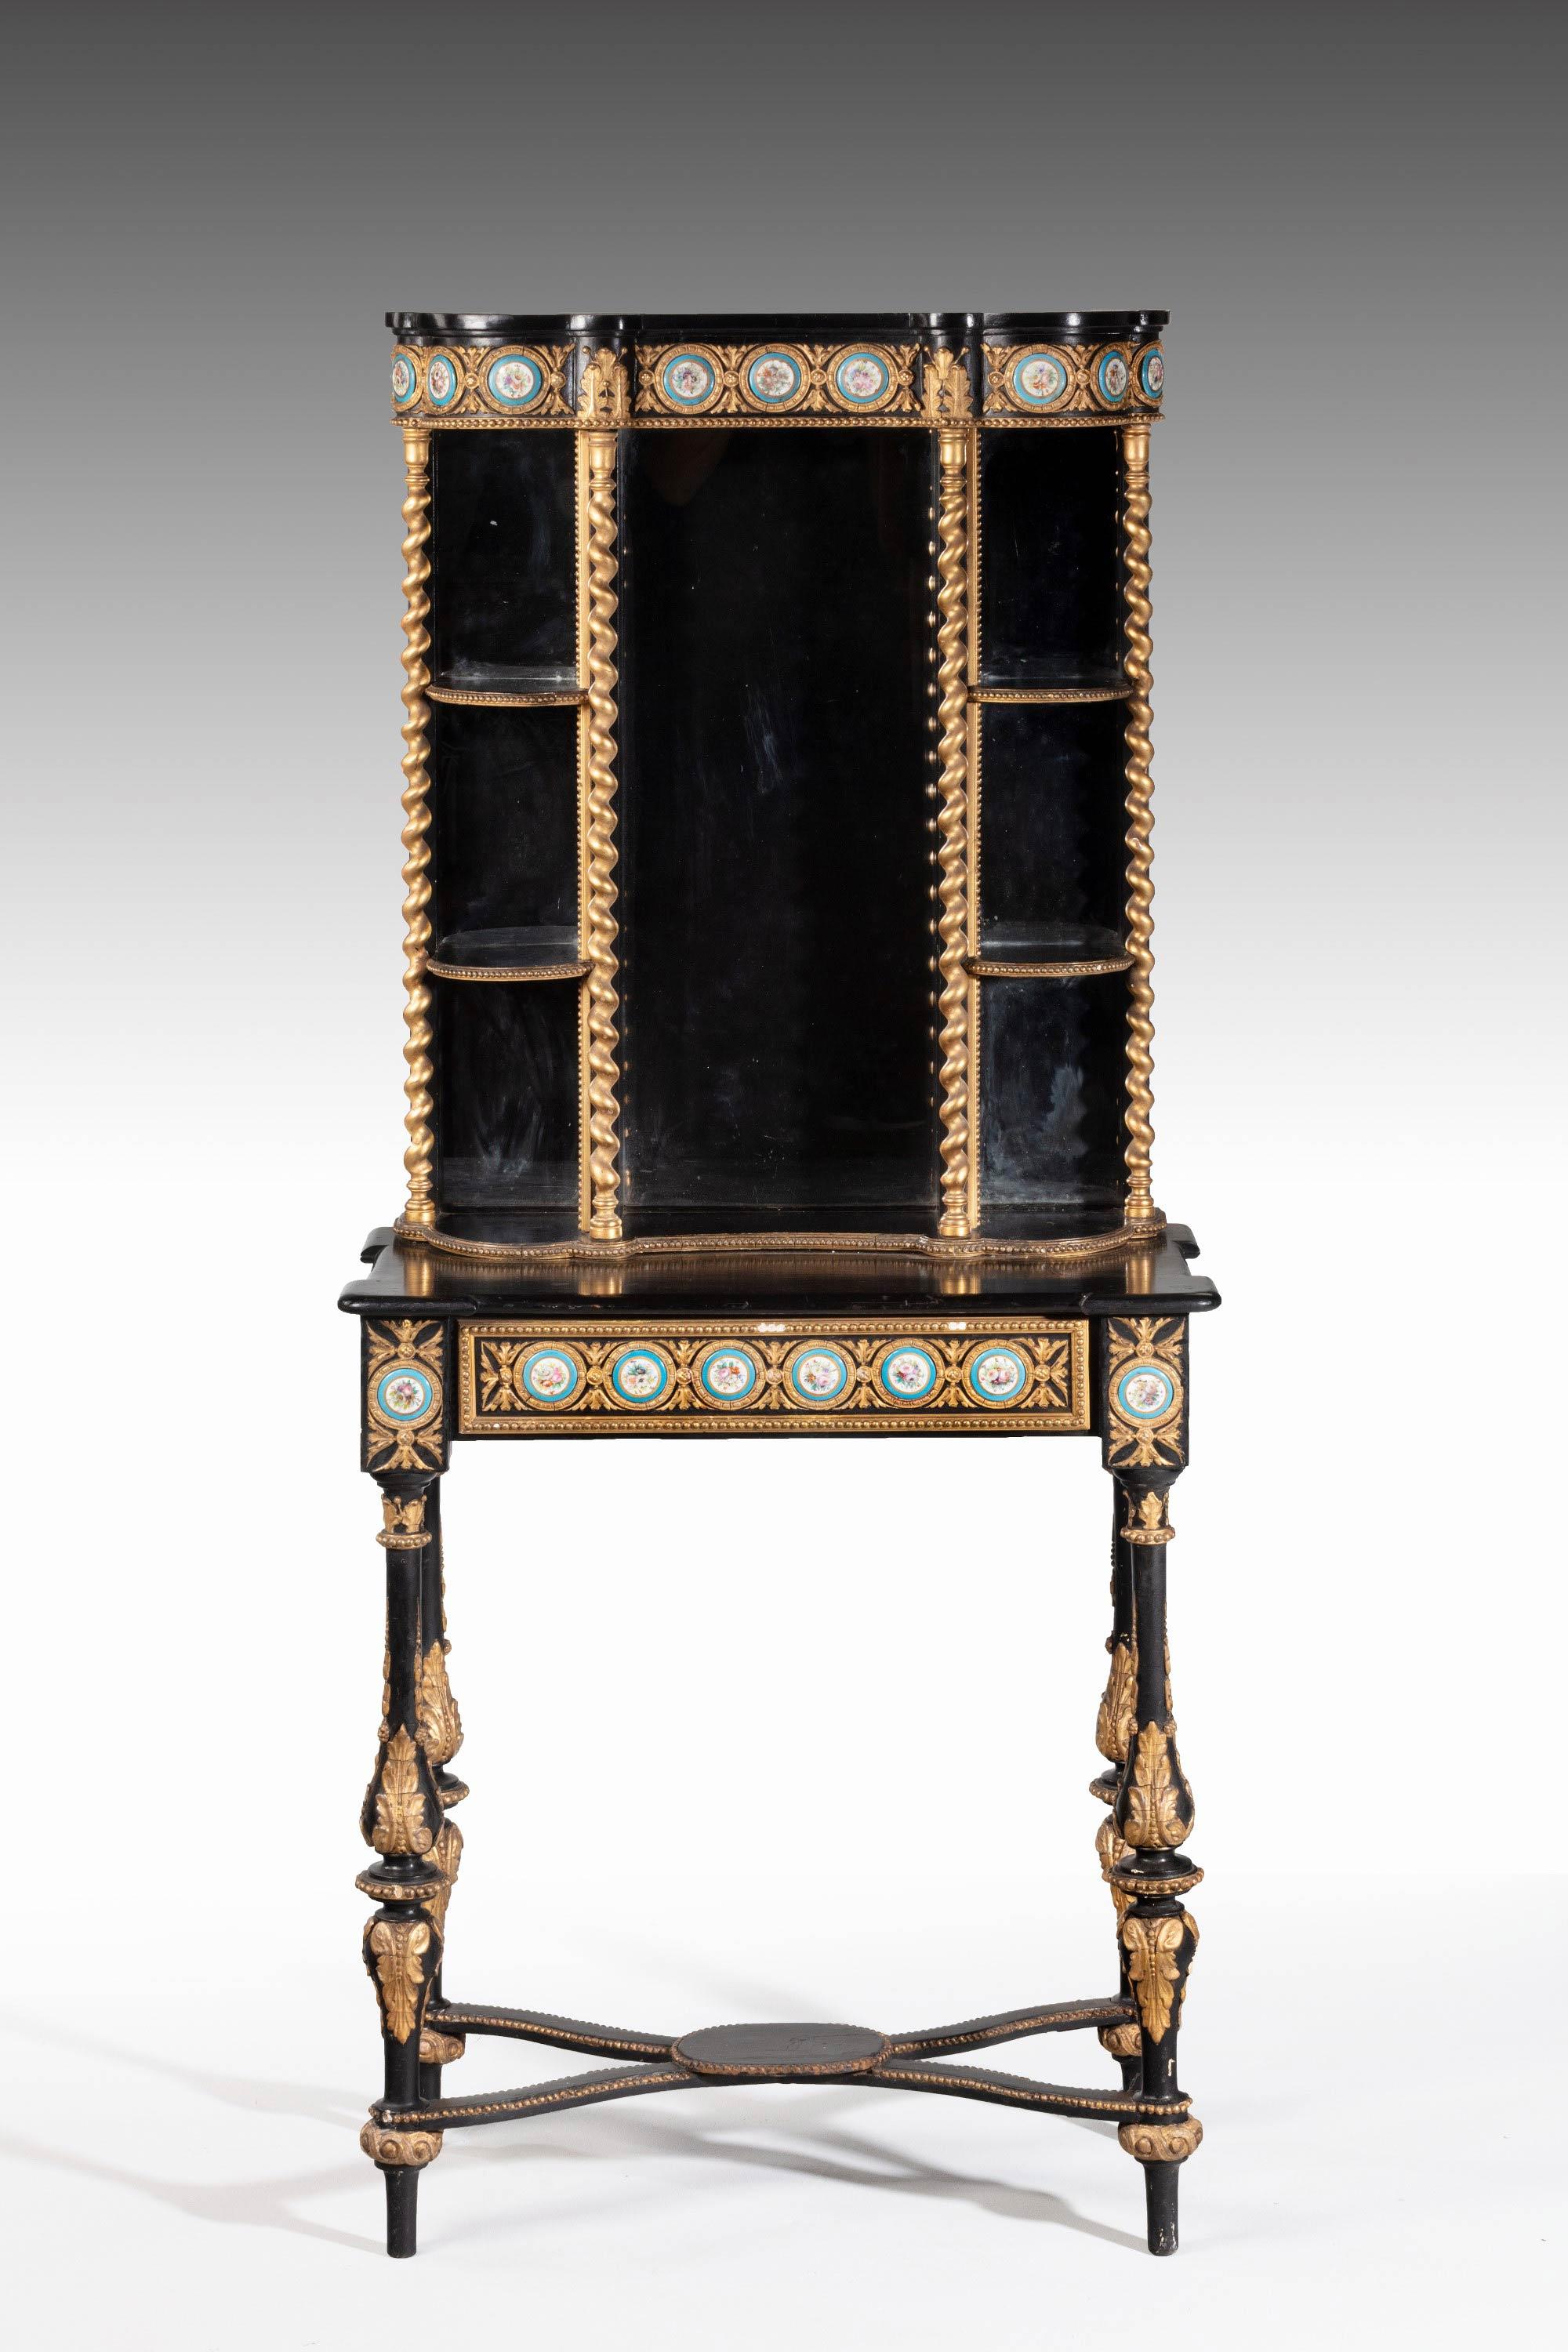 Small 19th Century French Cabinet with Elaborately Carved and Gilded Decoration 2